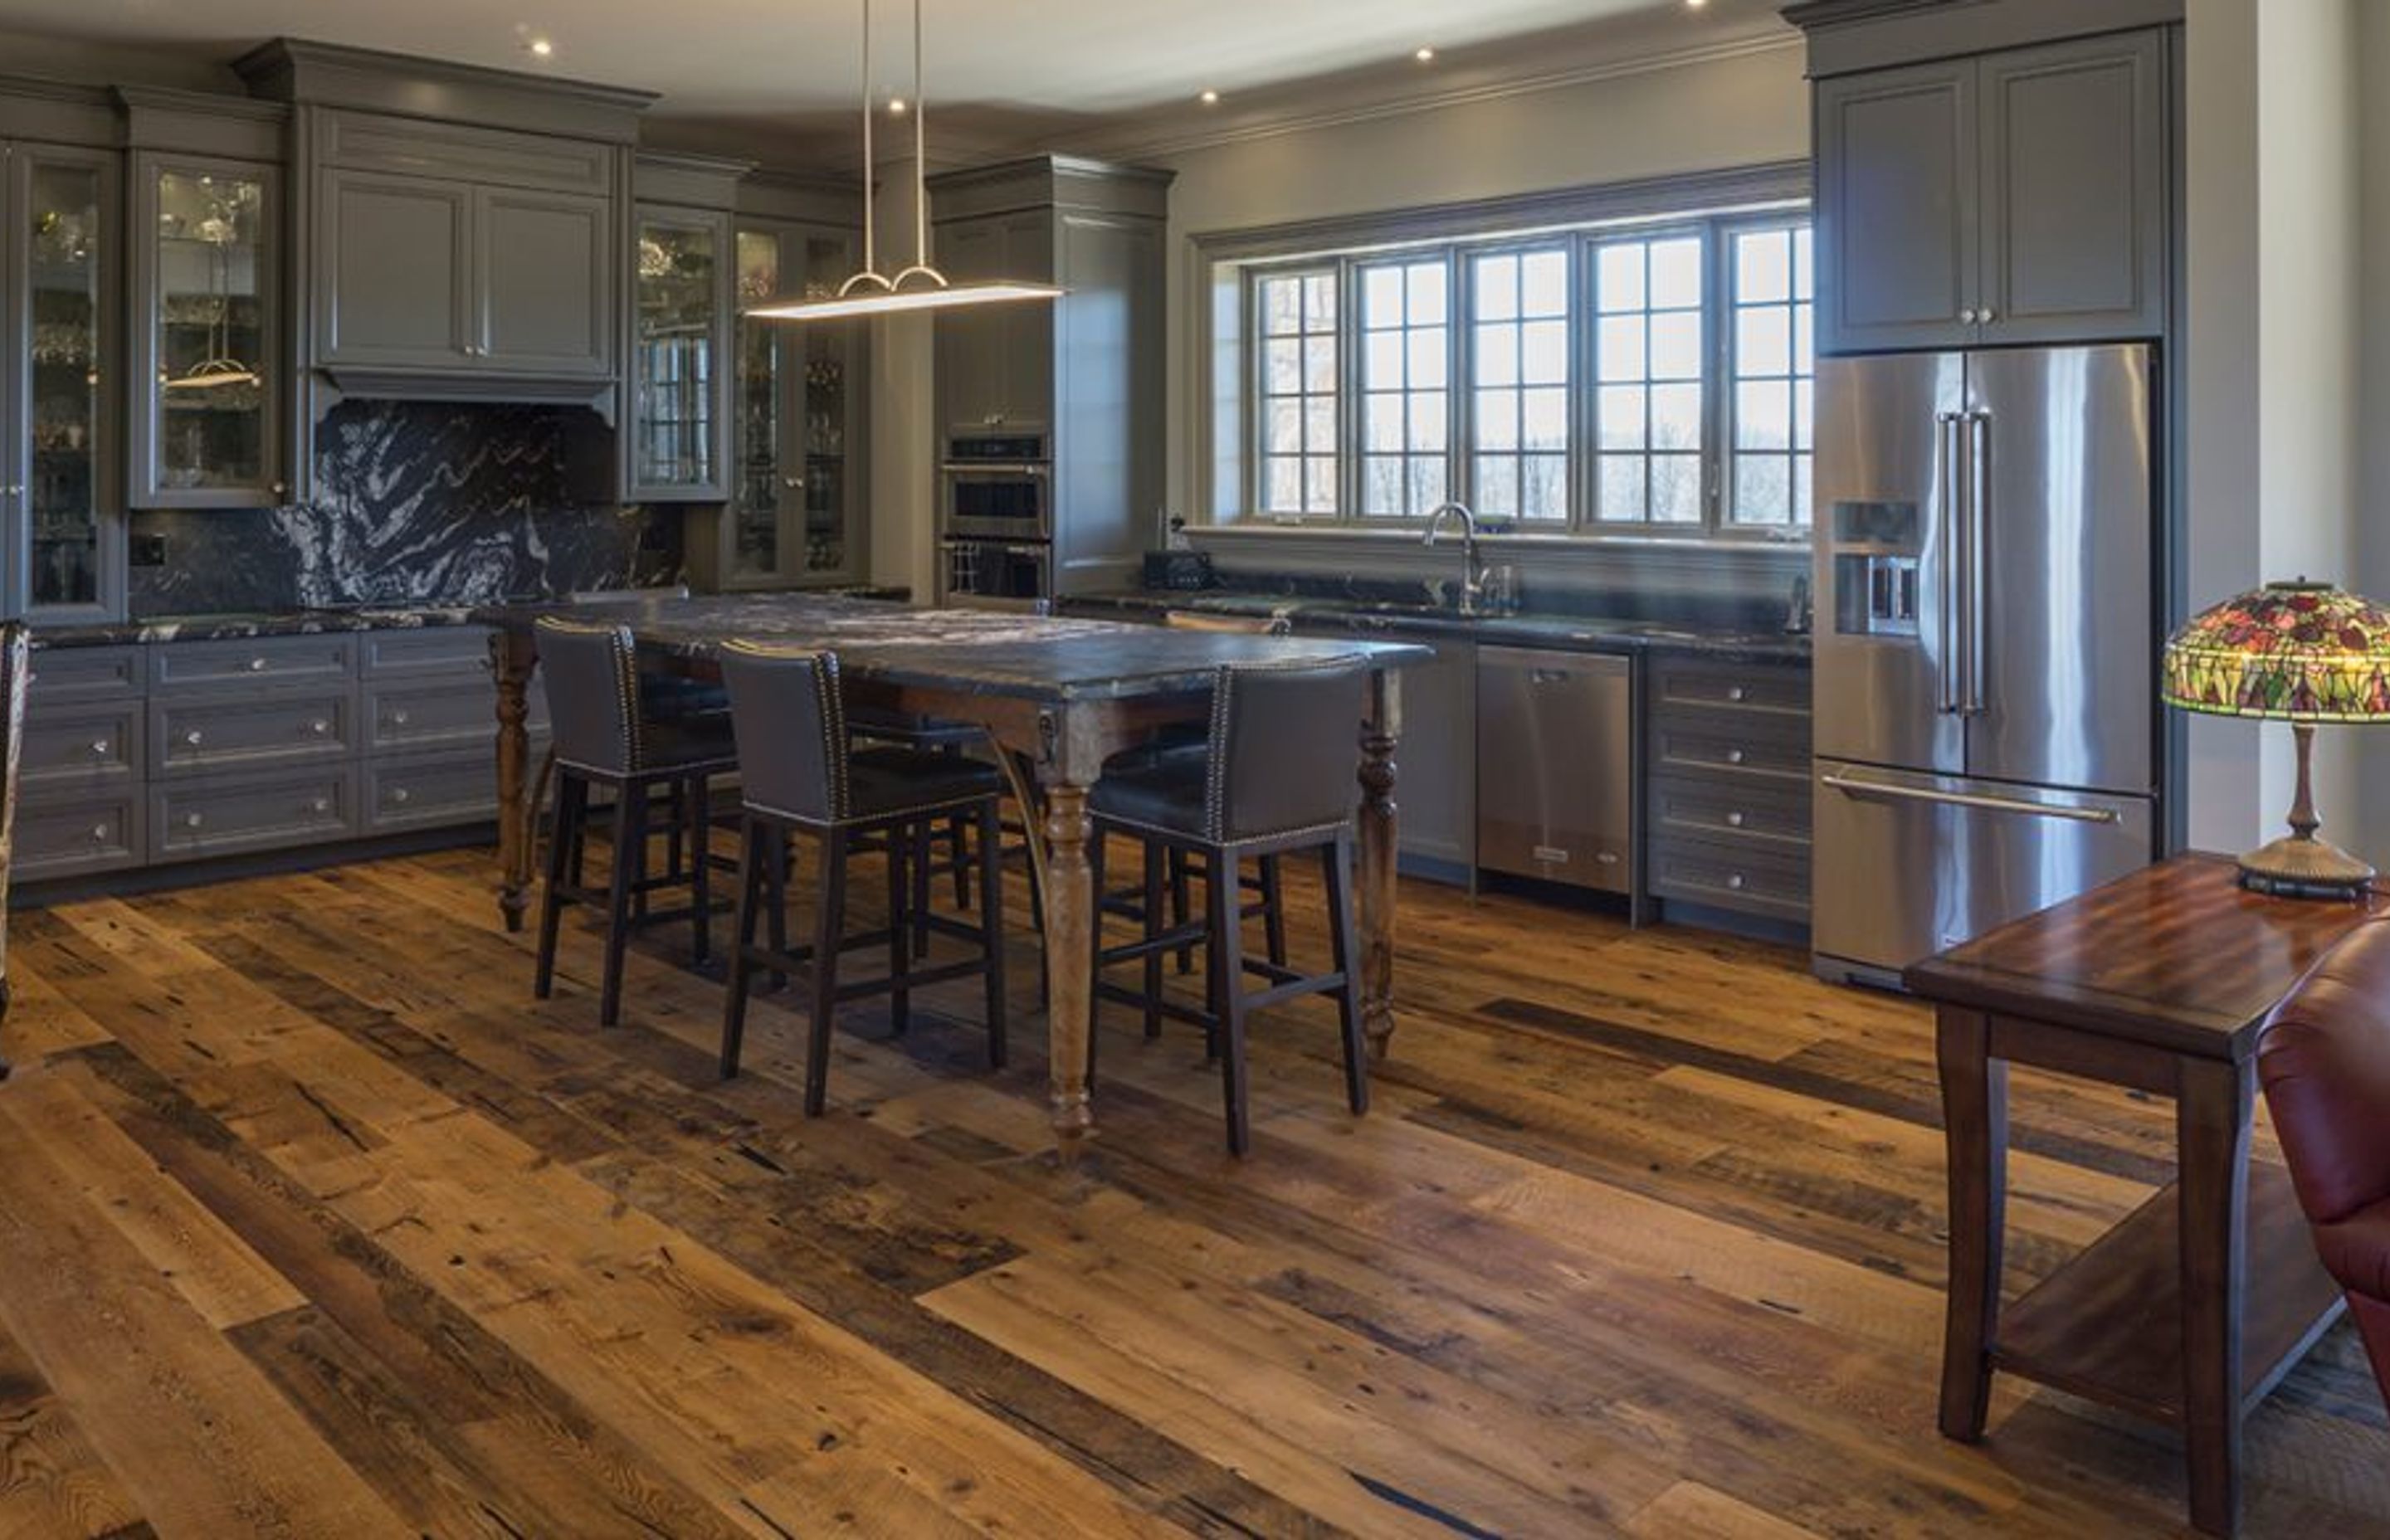 When to use wood floors in the kitchen